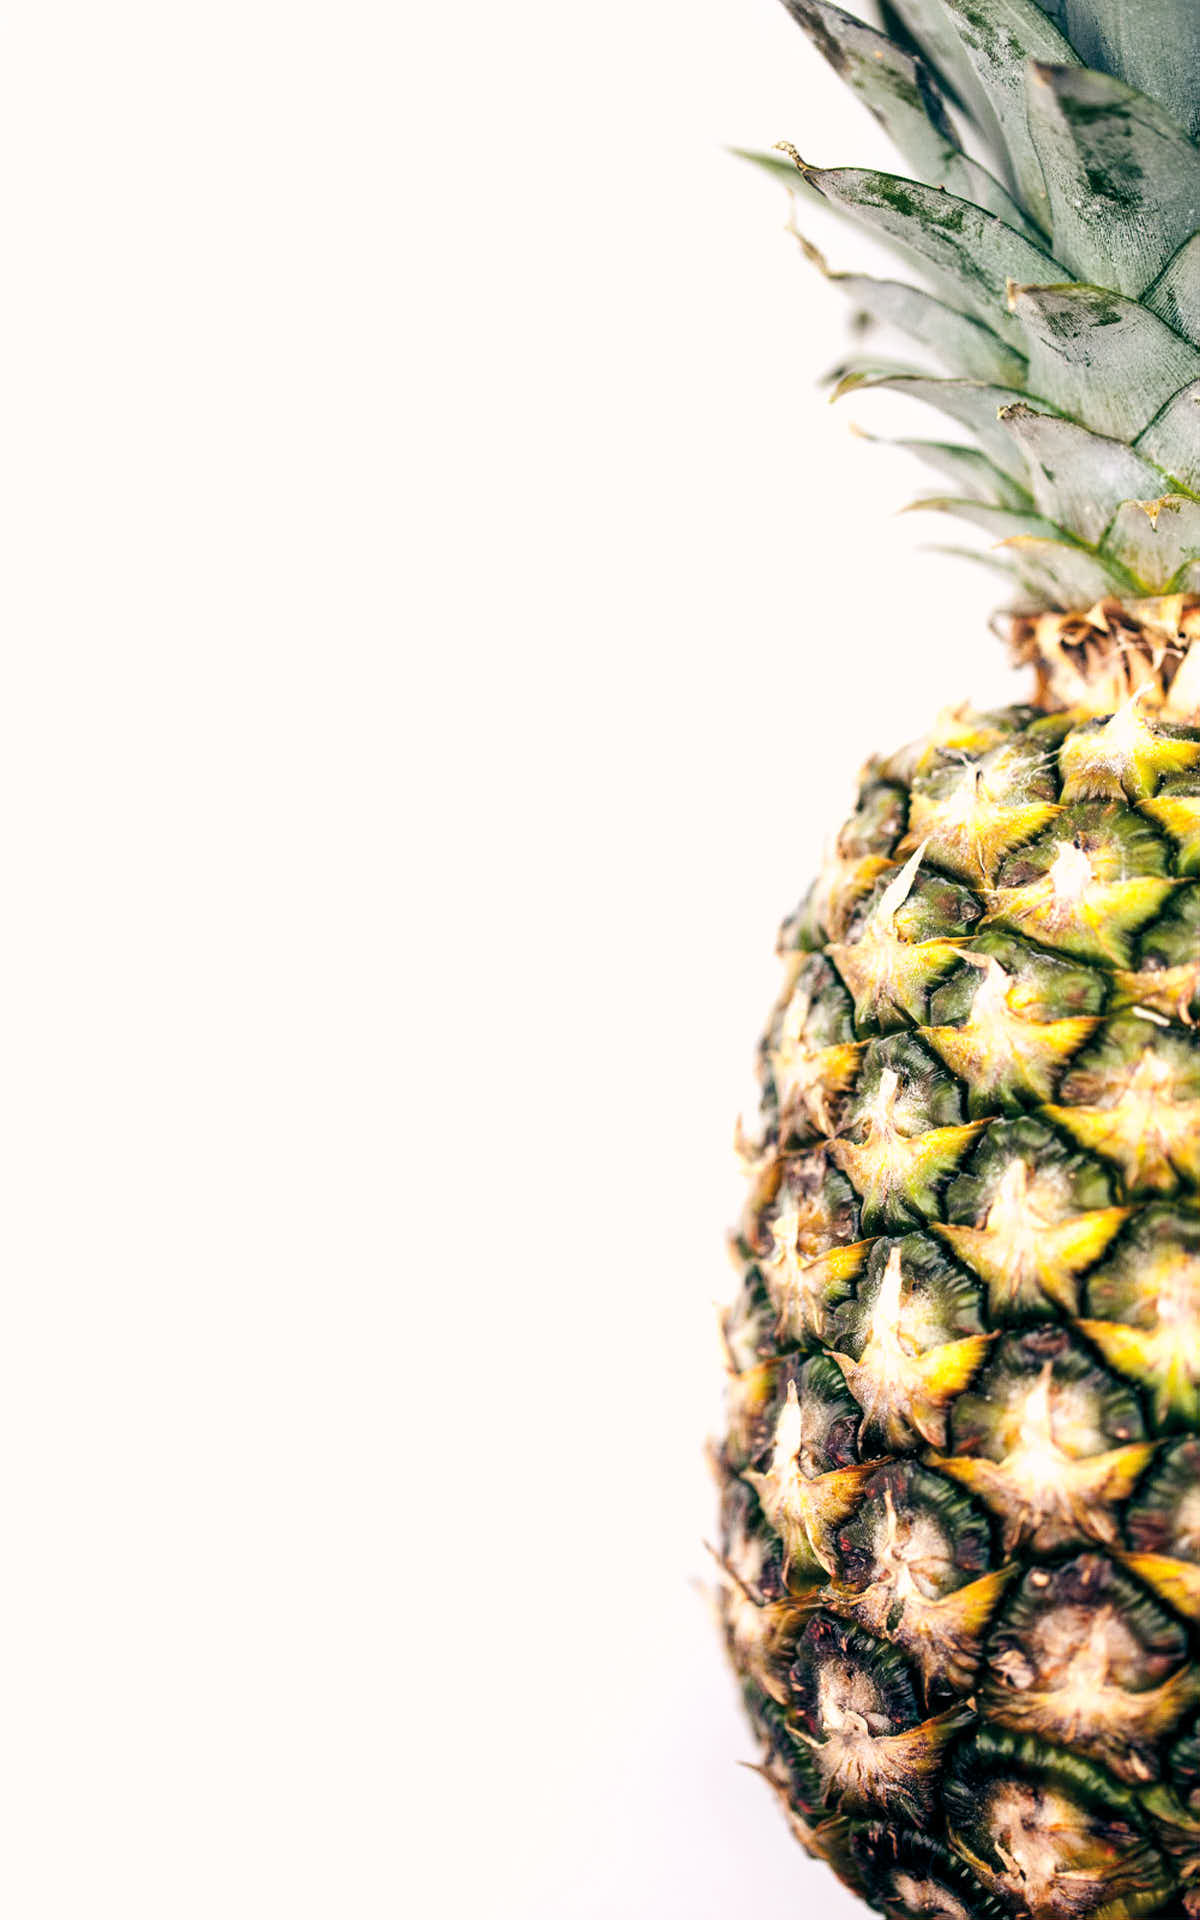 Uncut pineapple on a white background